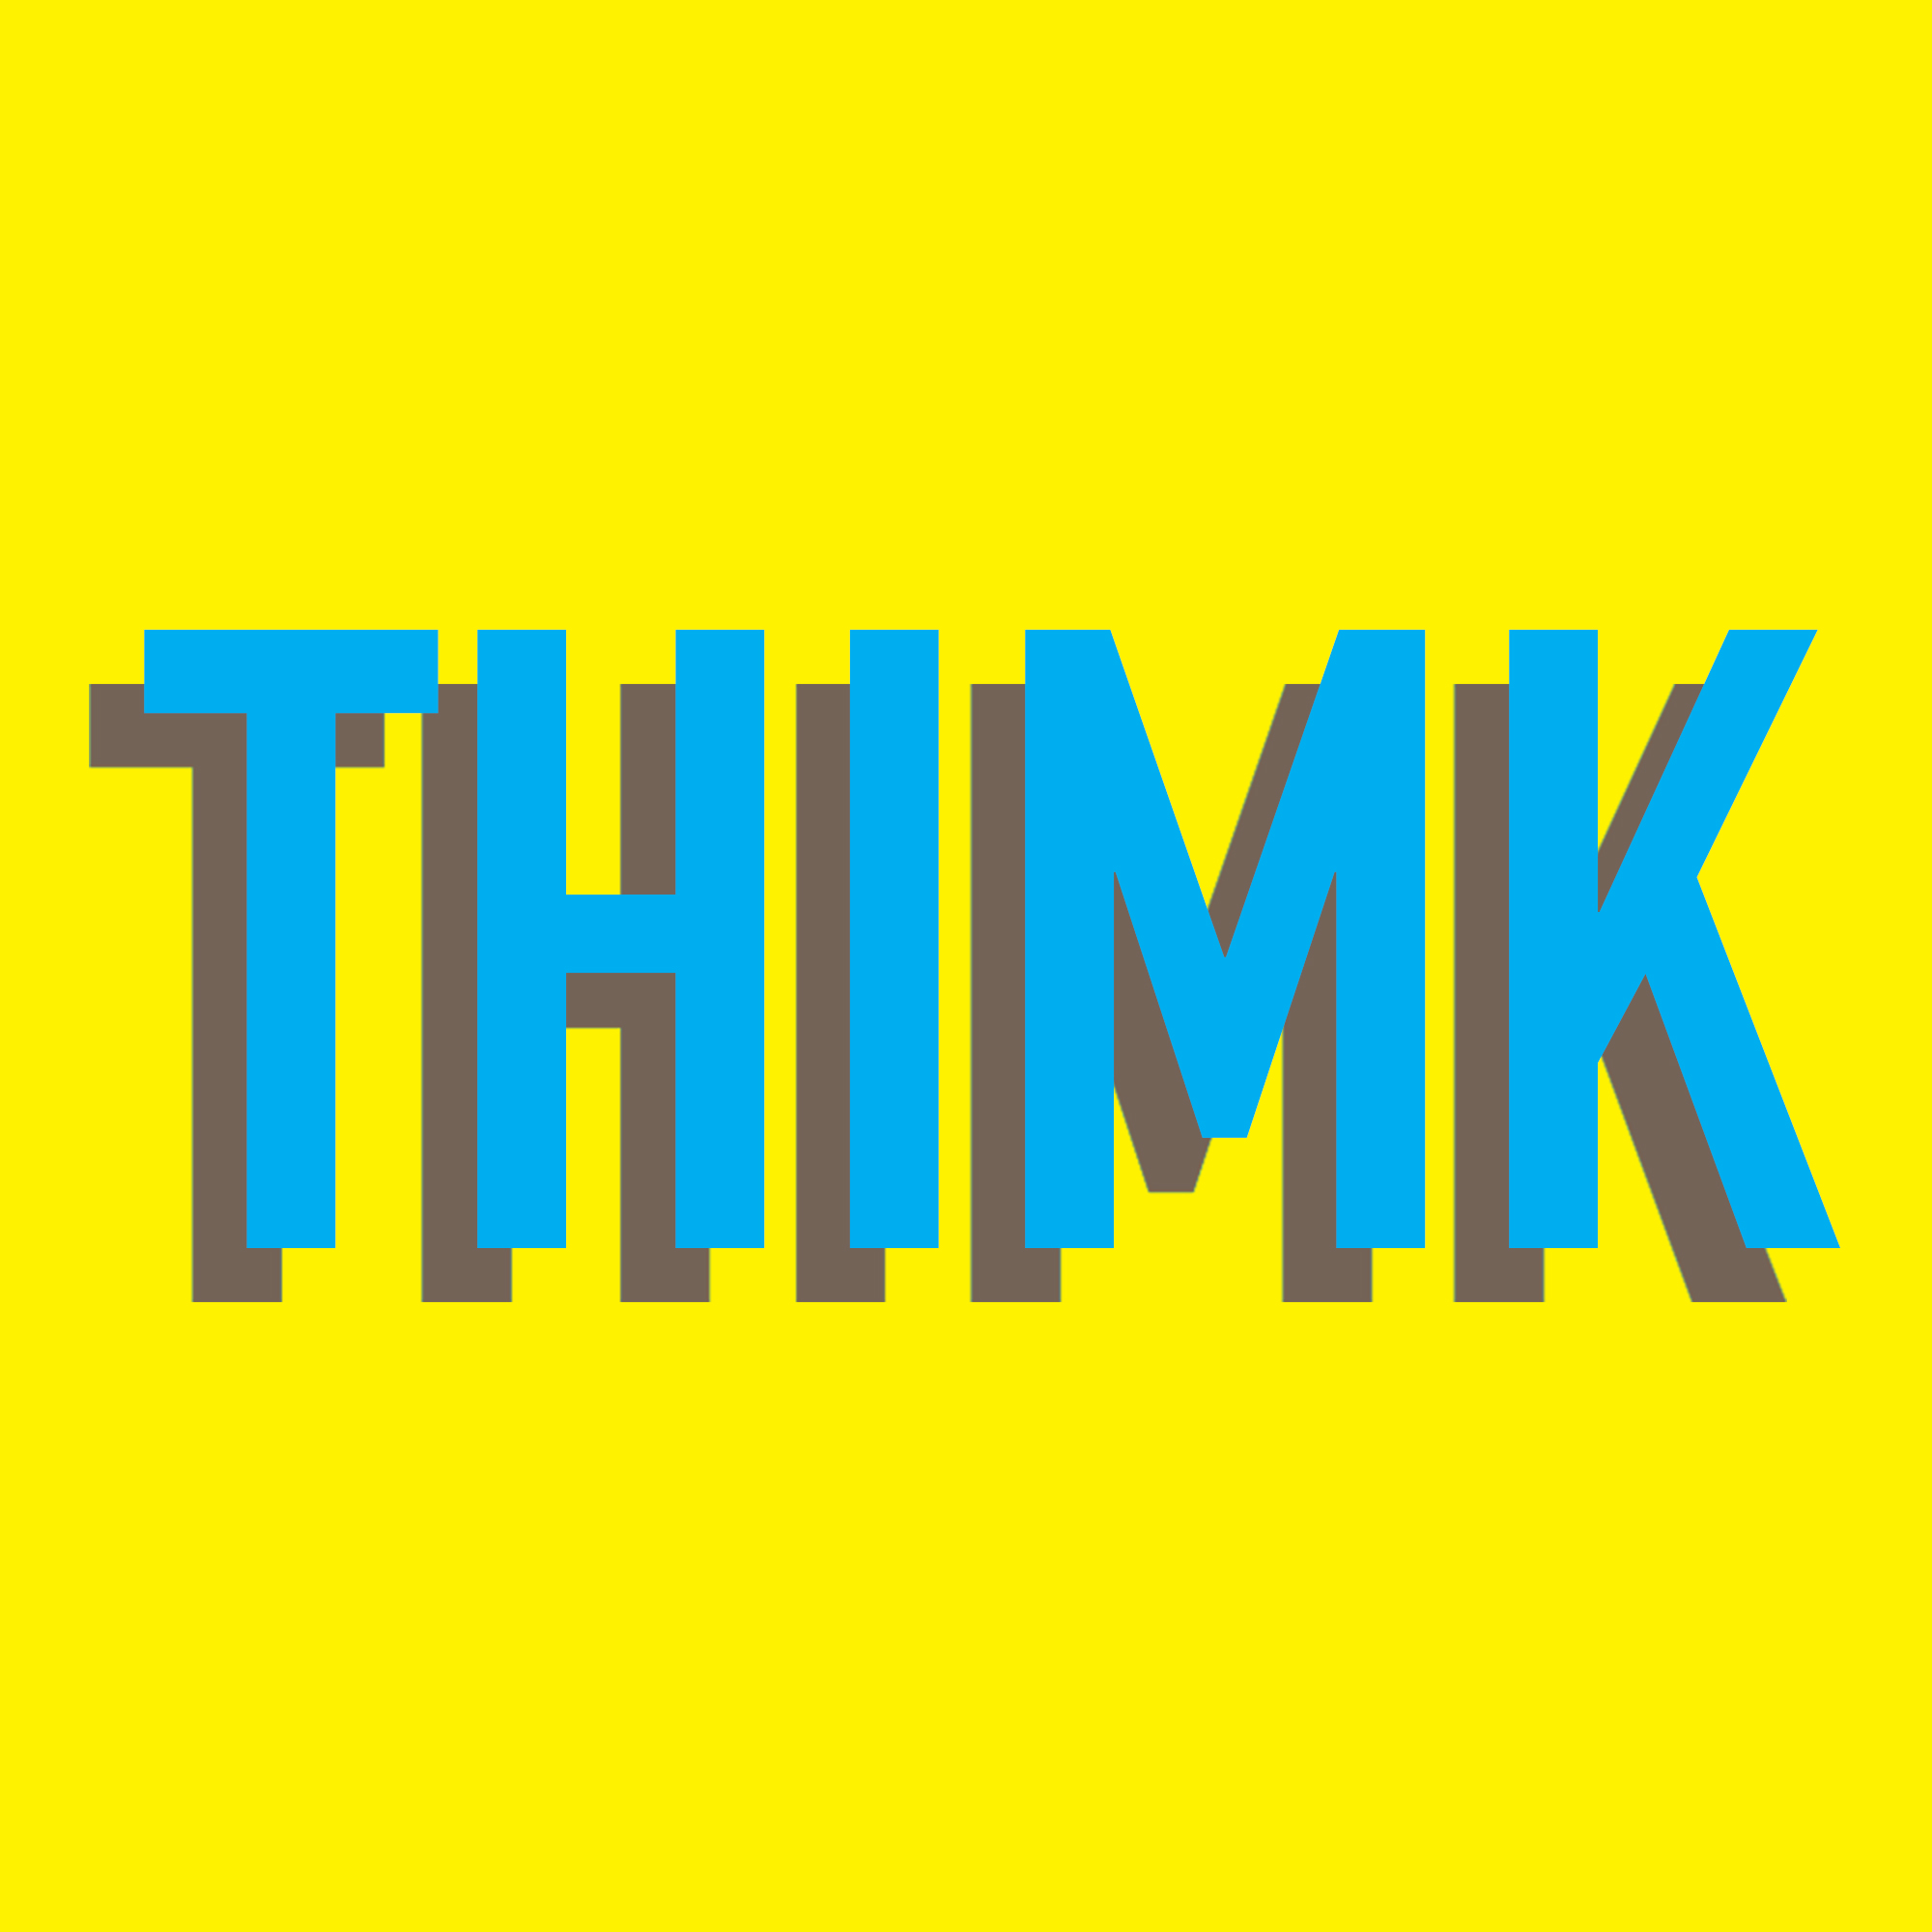 THIMK - a podcast for learning!